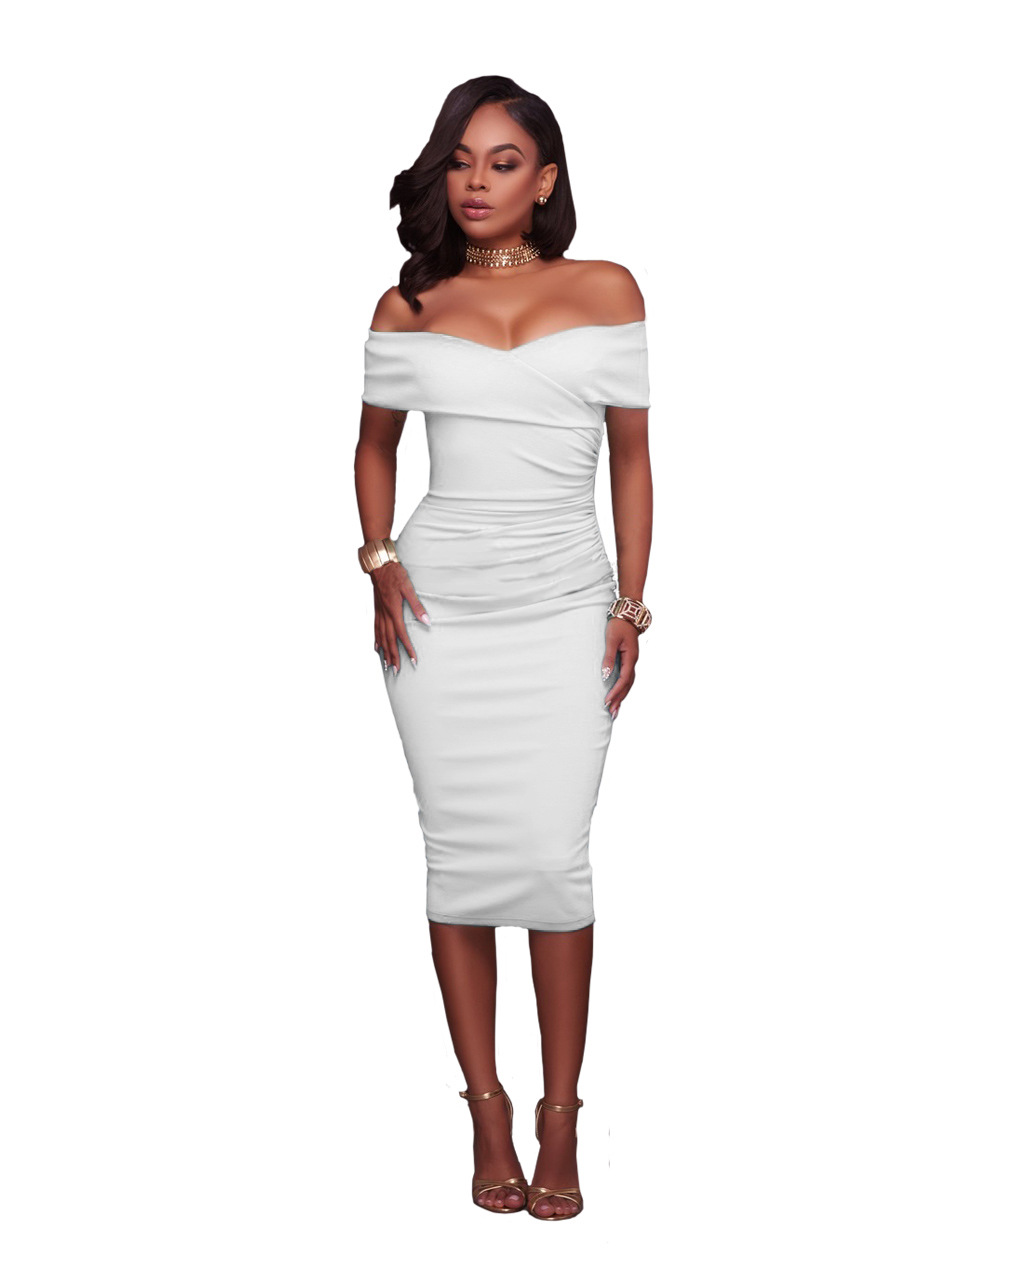 Women Midi Bodycon Dress Ruched Elegant Sexy Off the Shoulder Party Clubwear Pencil Dress off white